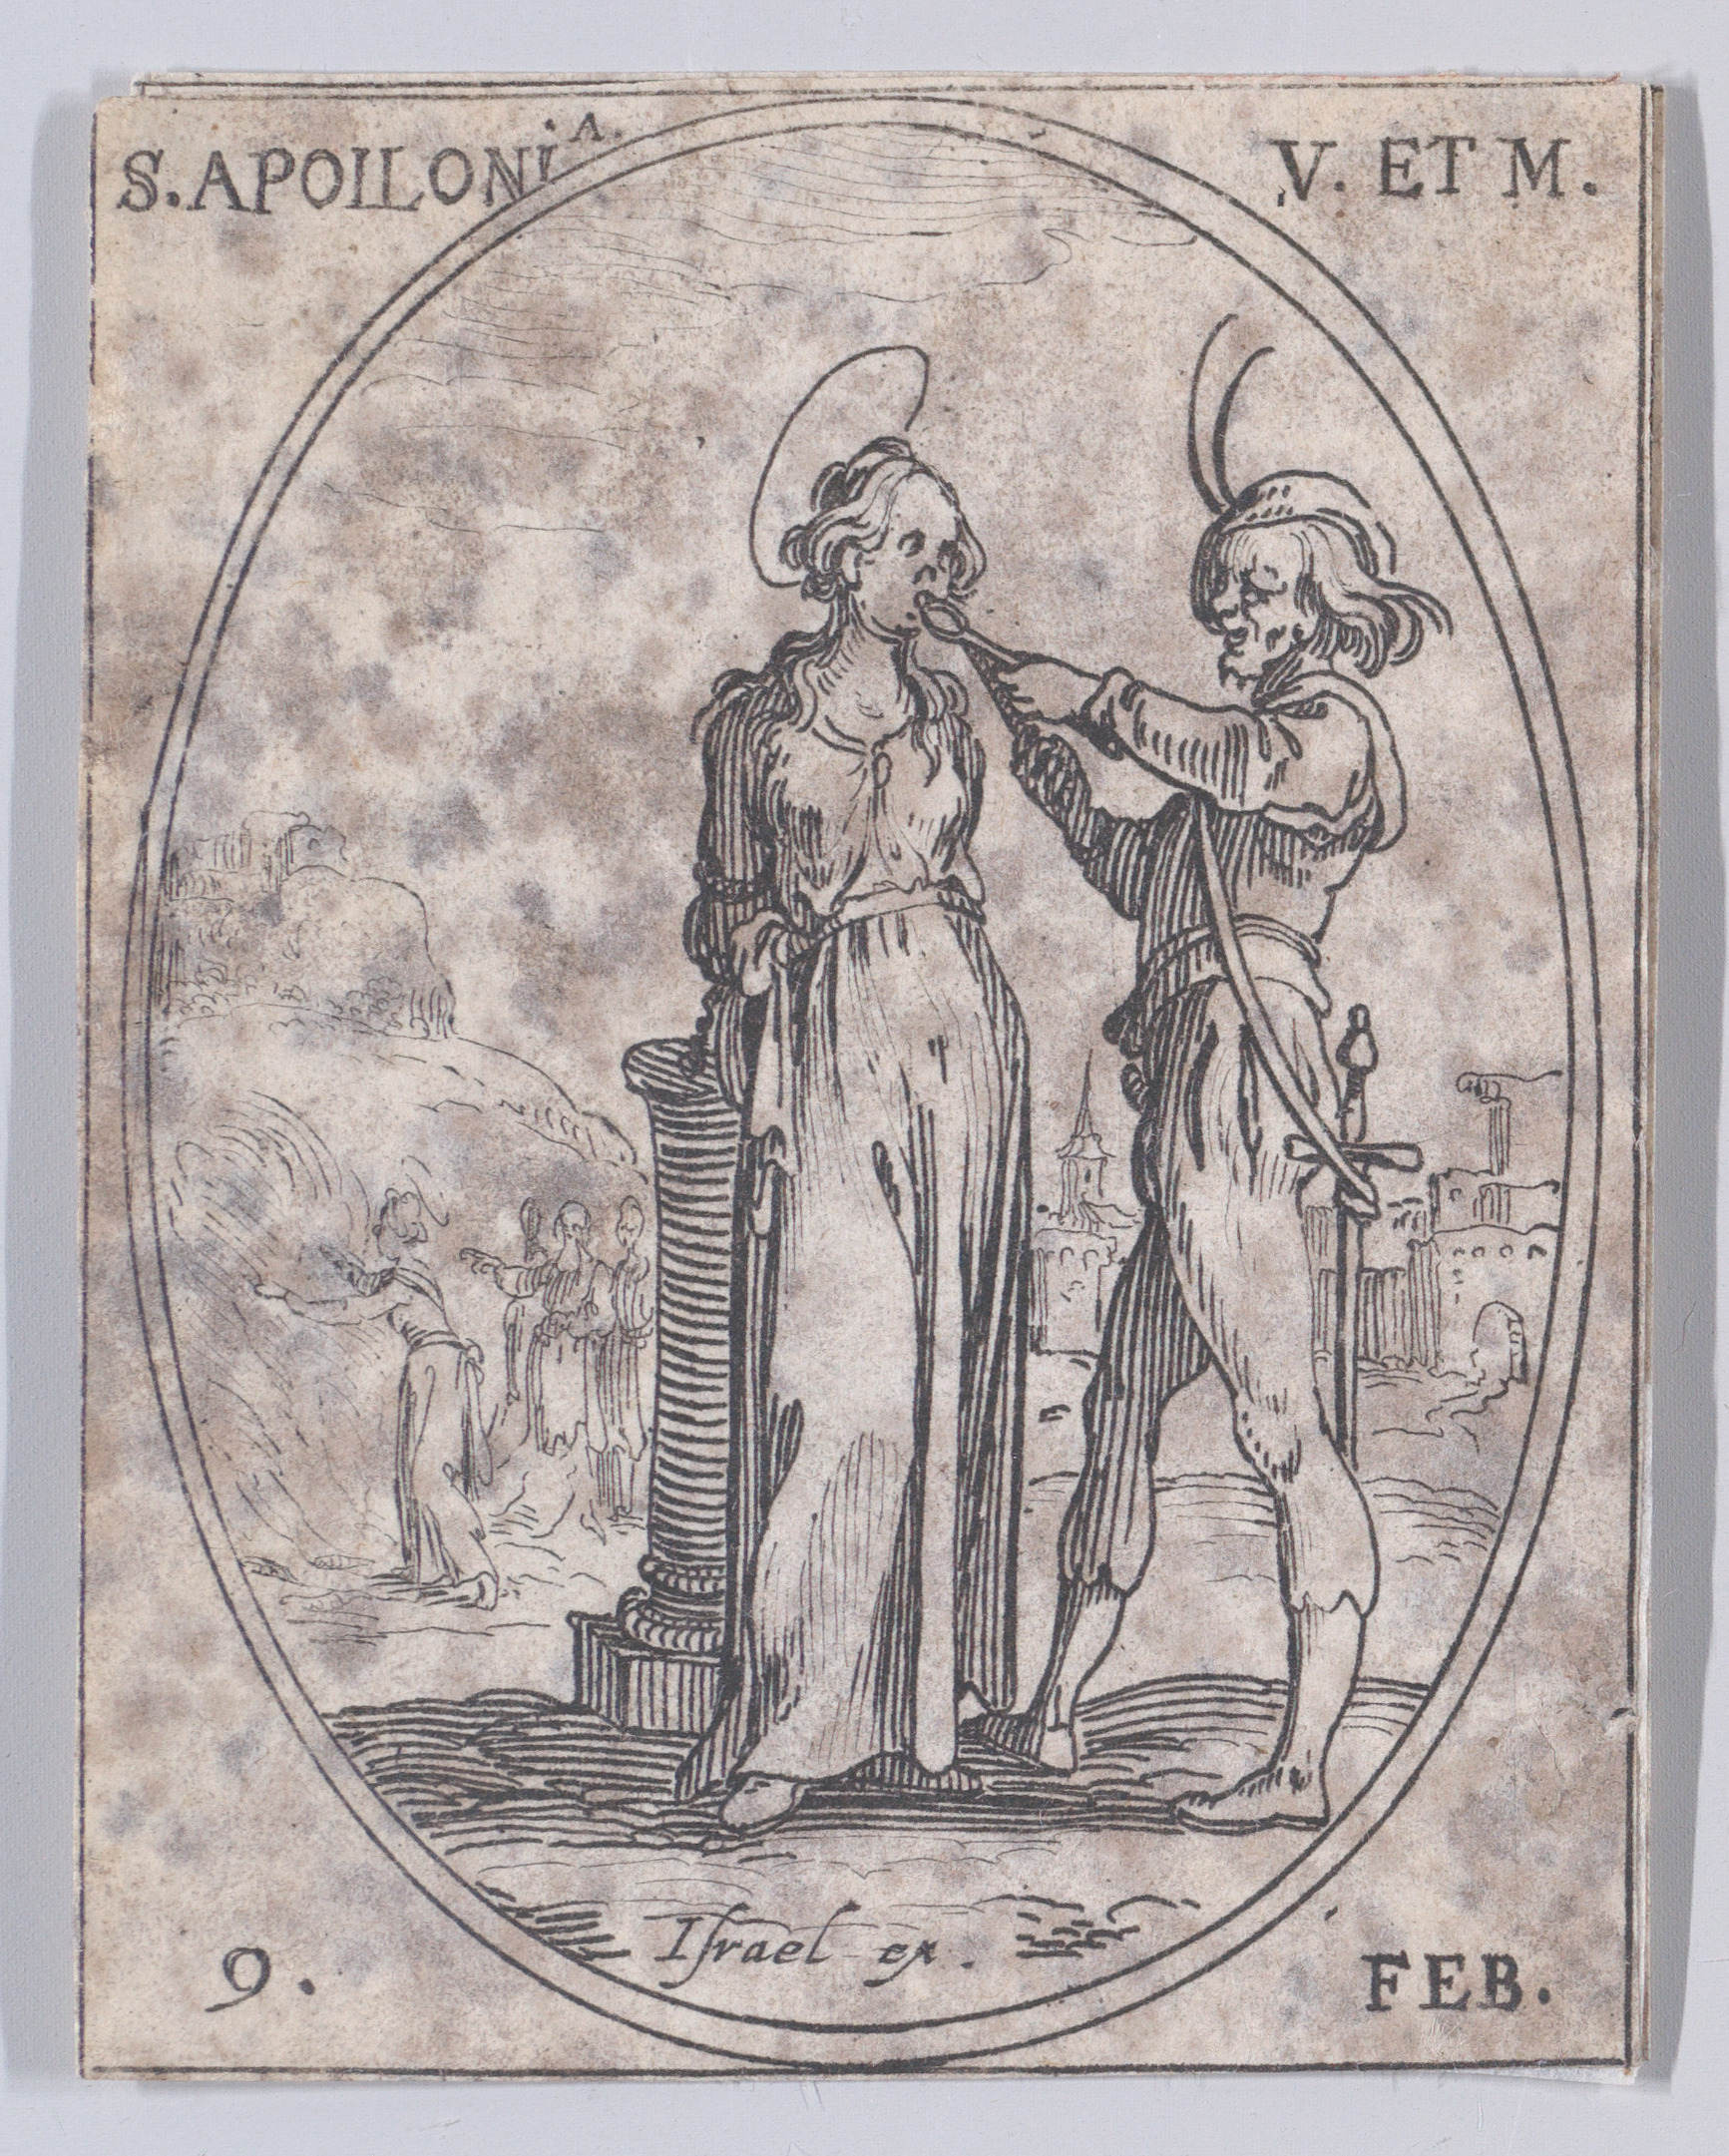 S. Apolline, vierge et martyre (St. Apollonia, Virgin and Martyr), February 9th, from Les Images De Tous Les Saincts et Saintes de L'Année (Images of All of the Saints and Feast Days of the Year), Jacques Callot (French, Nancy 1592–1635 Nancy), Etching; second state of two (Lieure)